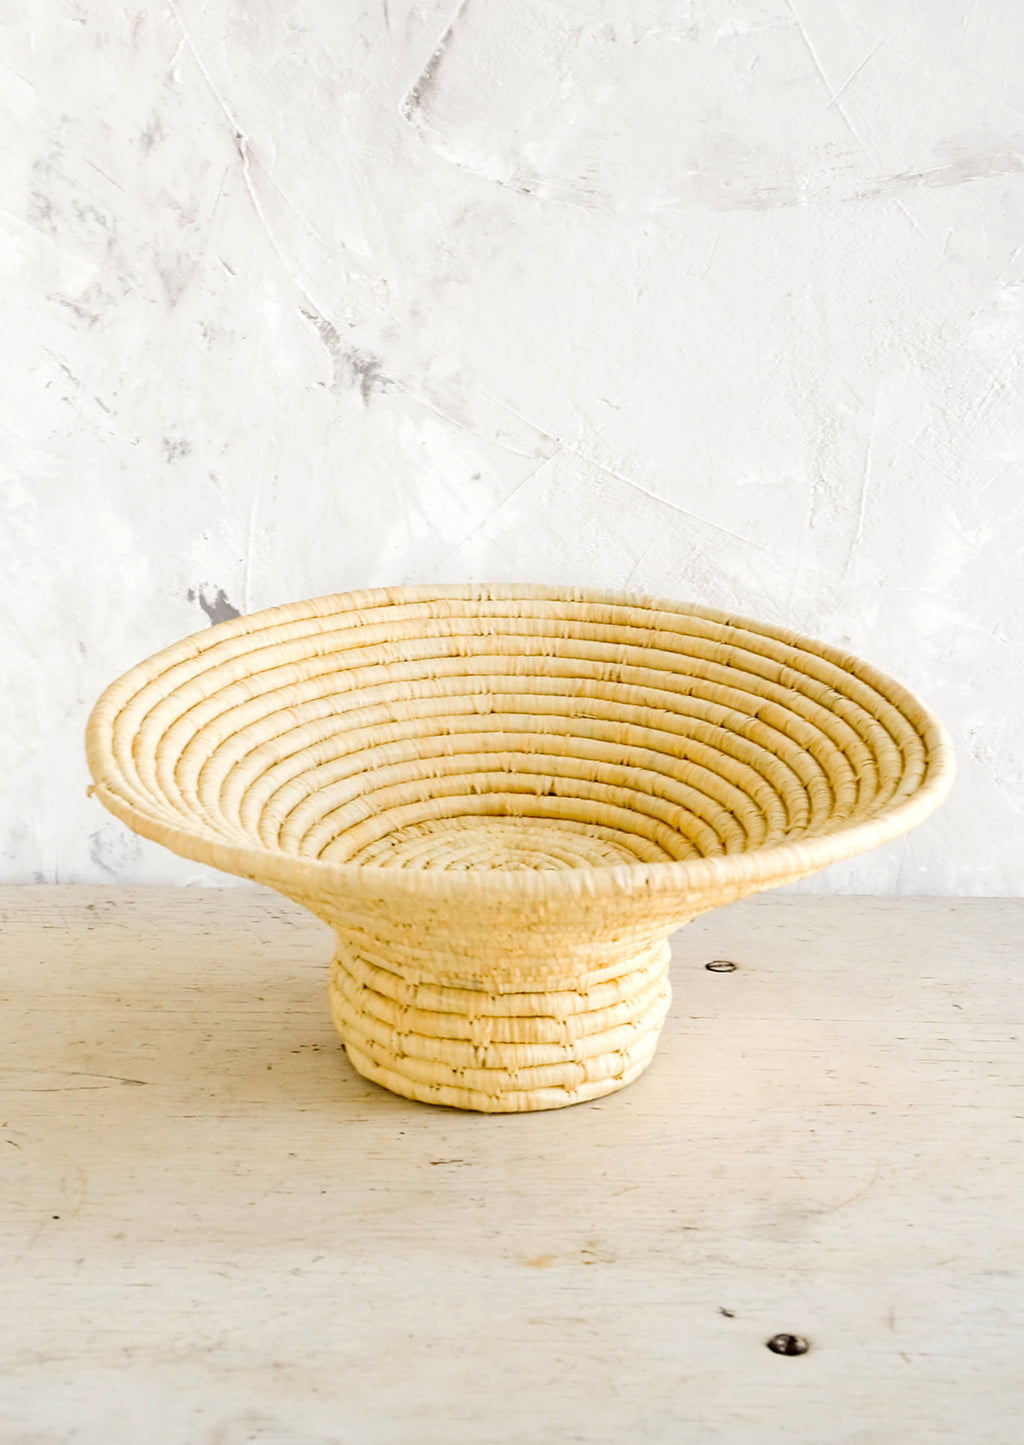 3: Footed pedestal bowl made from natural woven raffia, sitting on a table